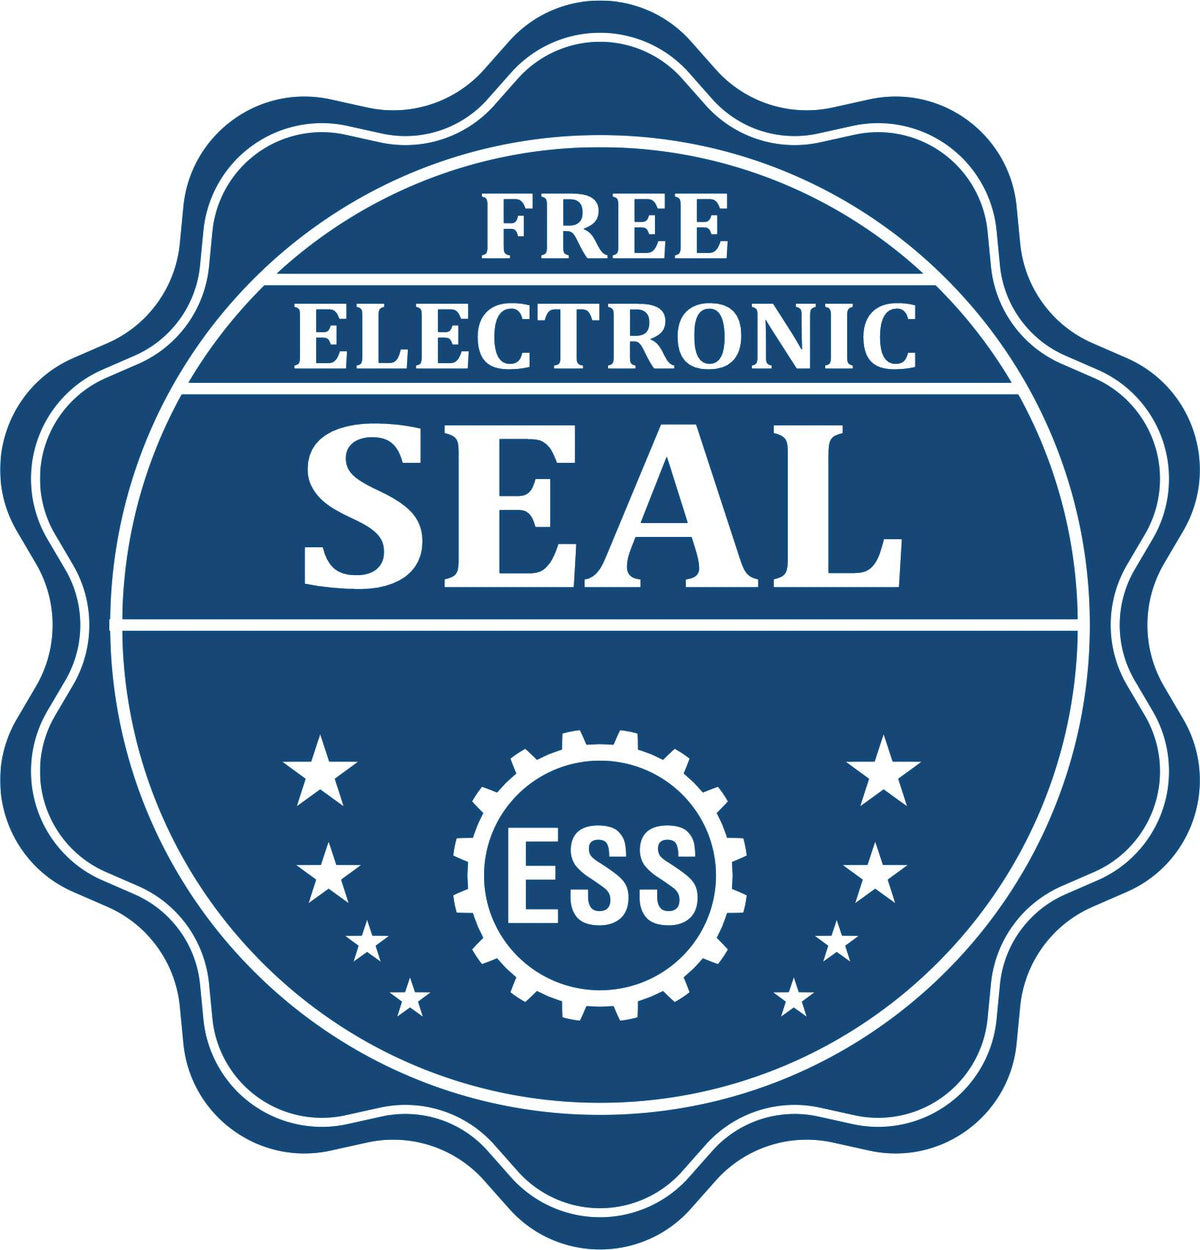 A badge showing a free electronic seal for the Premium MaxLight Pre-Inked Ohio Landscape Architectural Stamp with stars and the ESS gear on the emblem.